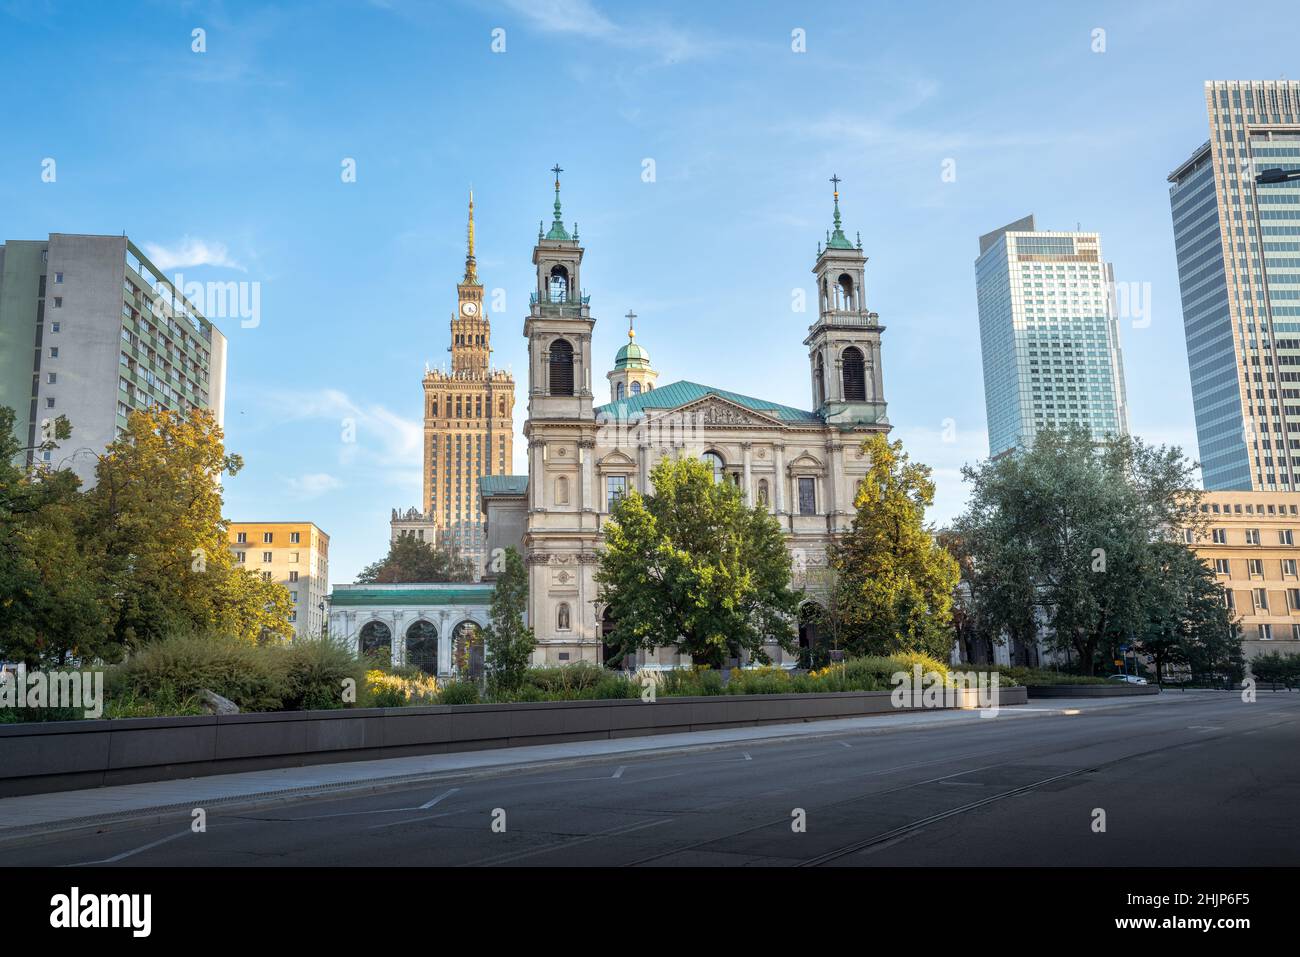 All Saints Church and Palace of Culture and Science - Warsaw, Poland Stock Photo